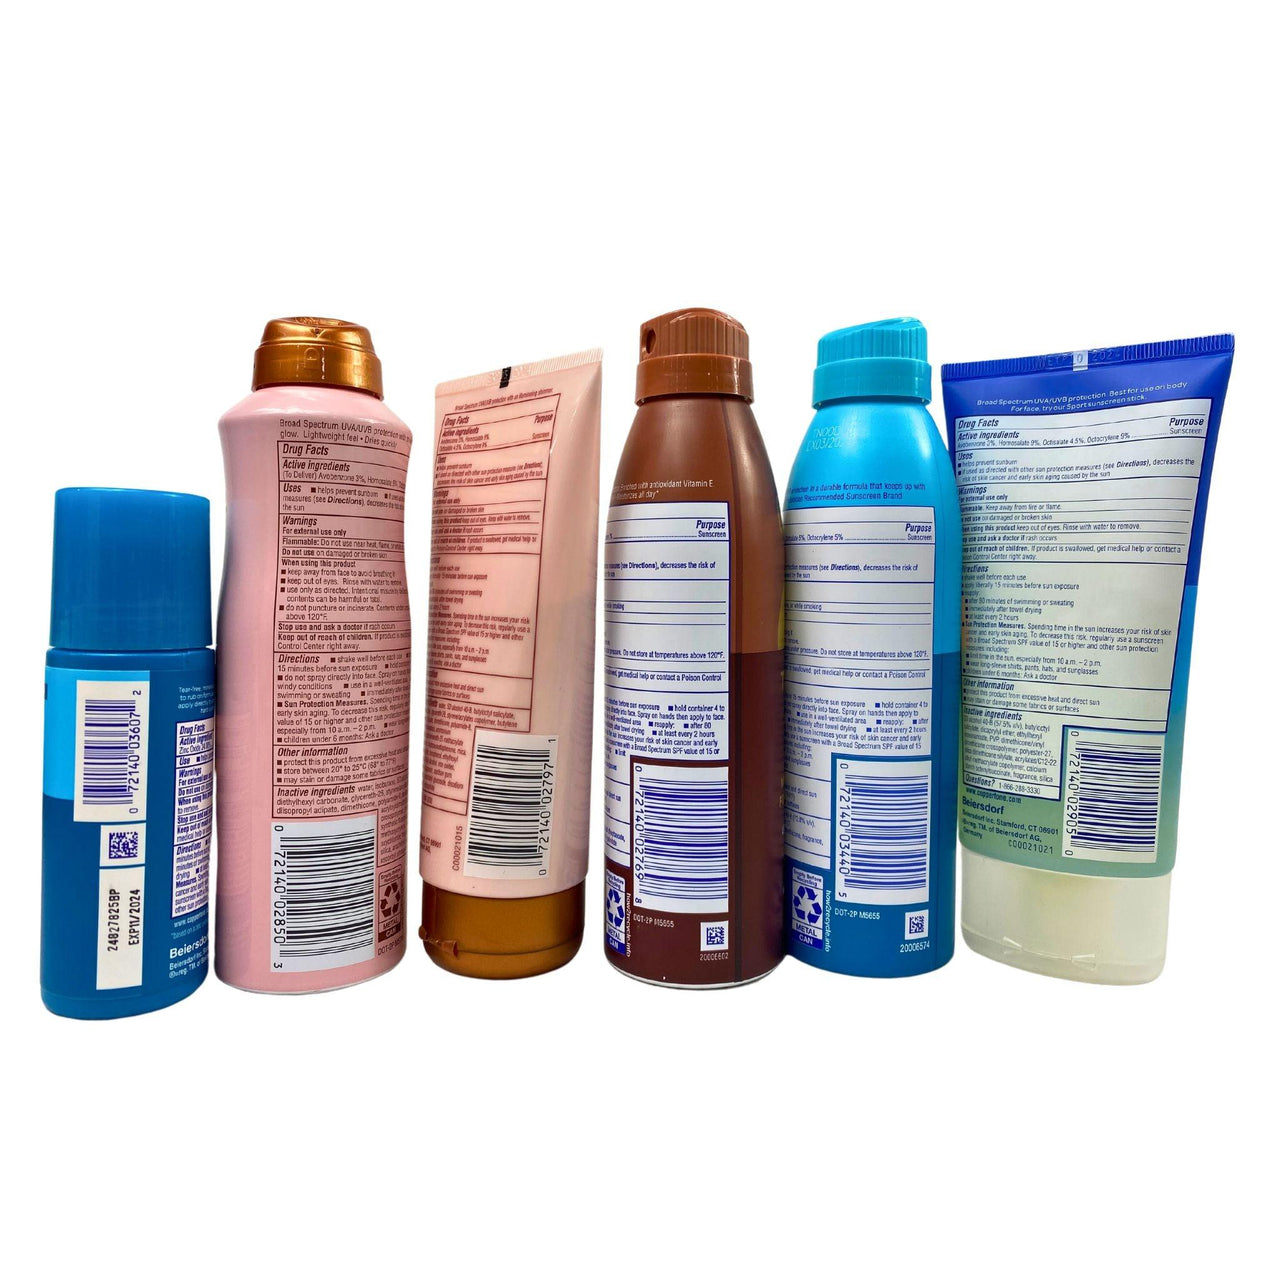 Coppertone Mix Includes Glow Shimmer,Tanning,Kids Assorted SPF's and Sizes (60 pcs lot) - Discount Wholesalers Inc